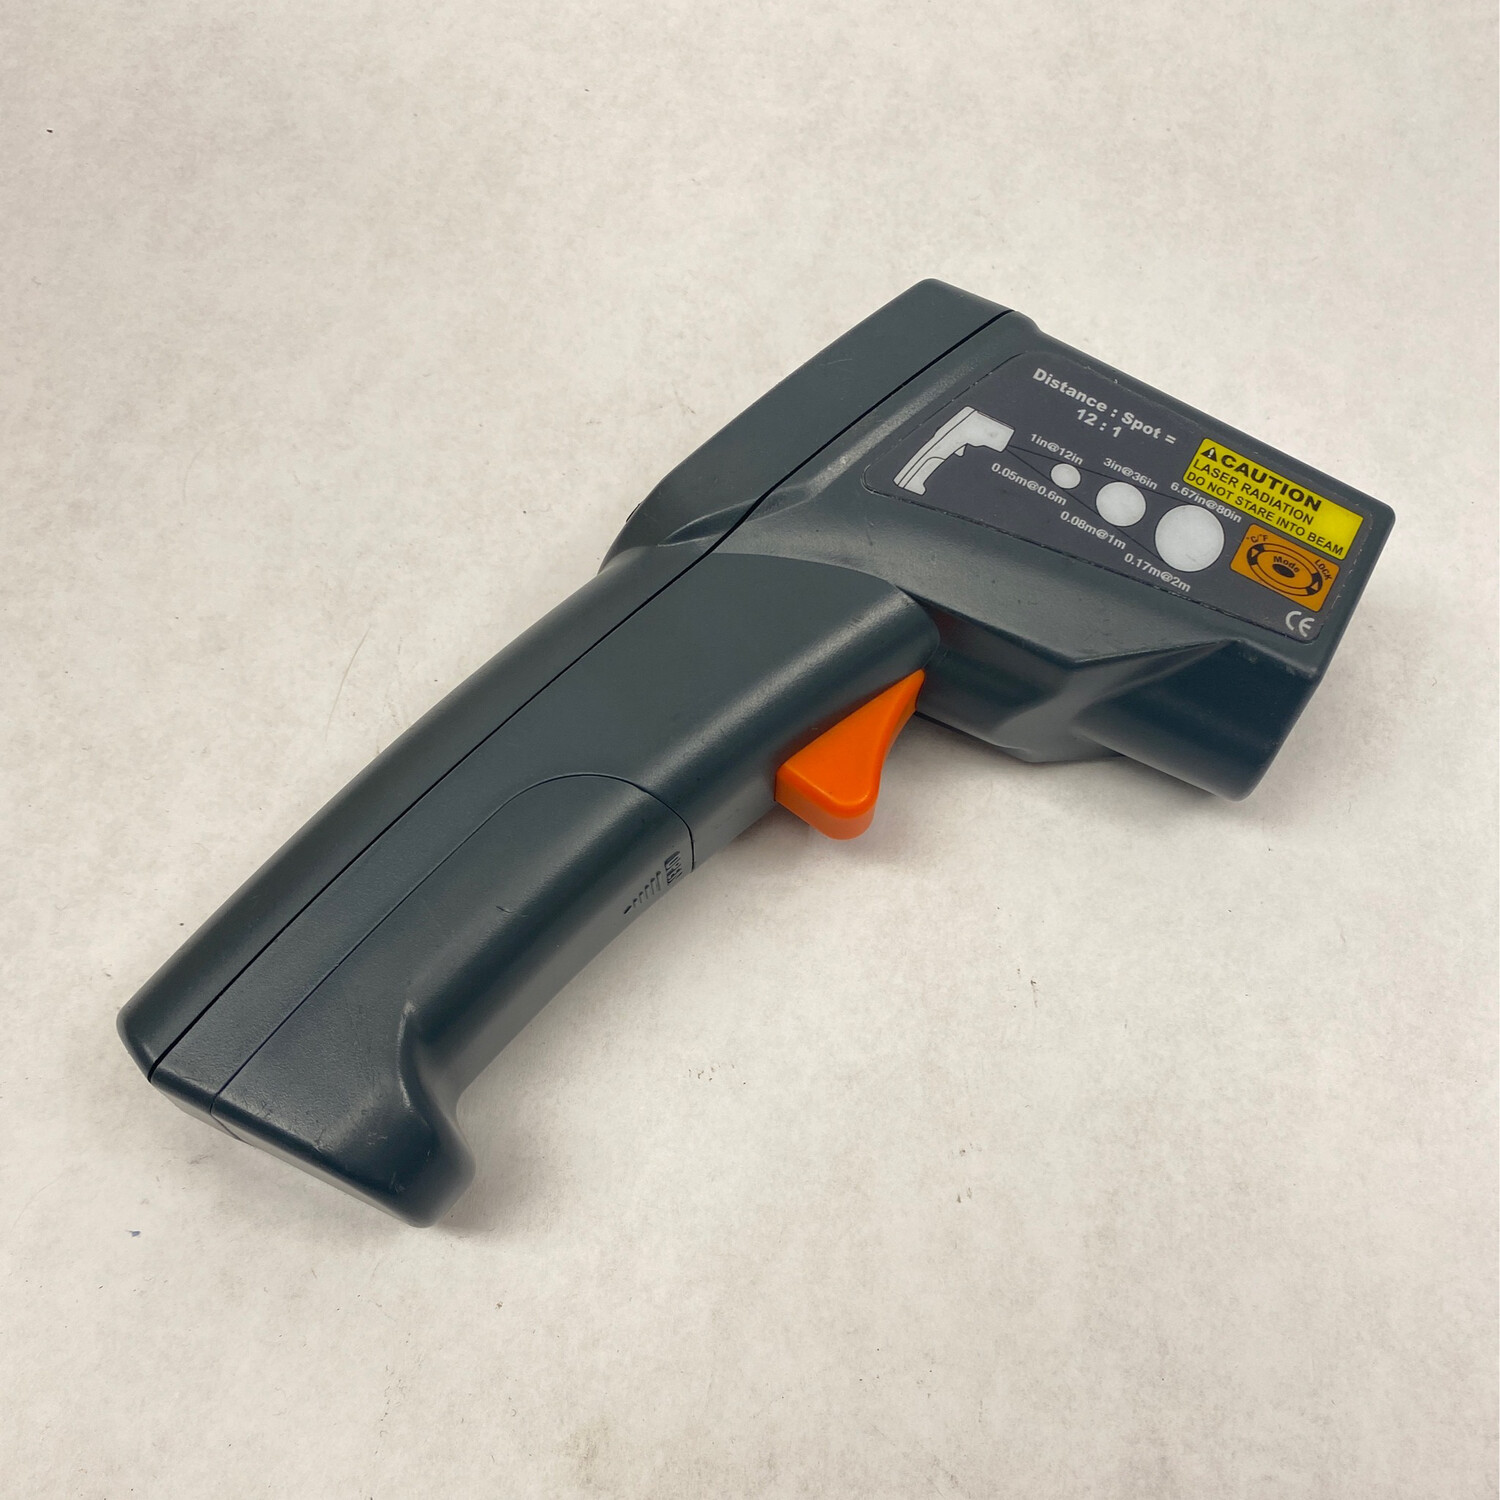 Blue Point Infrared Thermometer, RTEMPB7